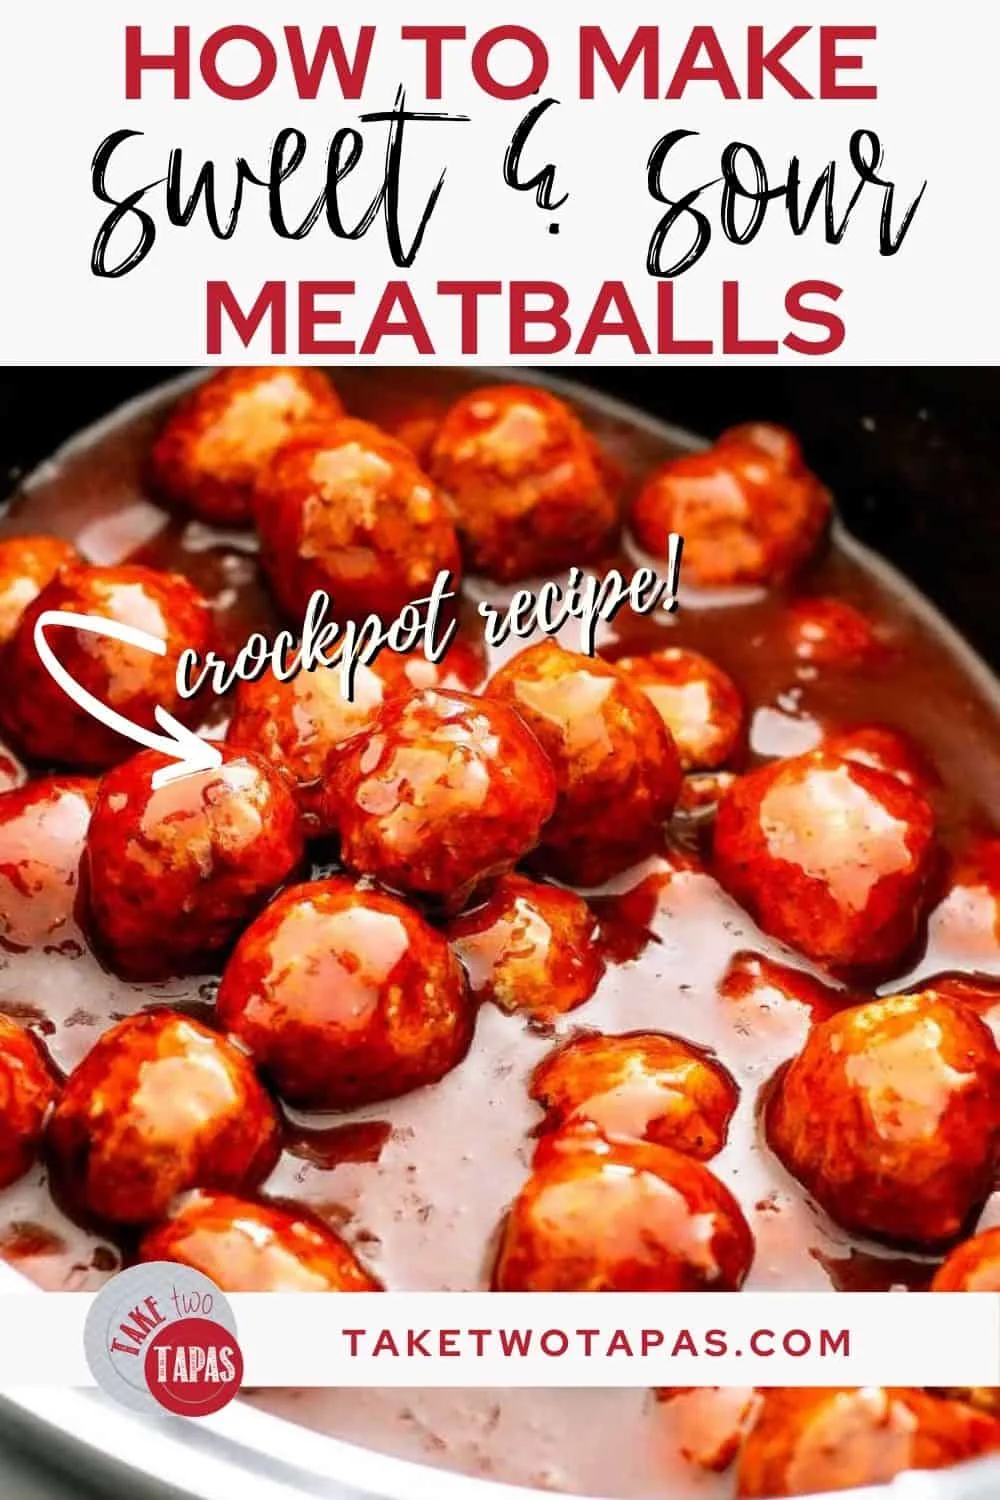 meatballs with text "sweet & sour meatballs"